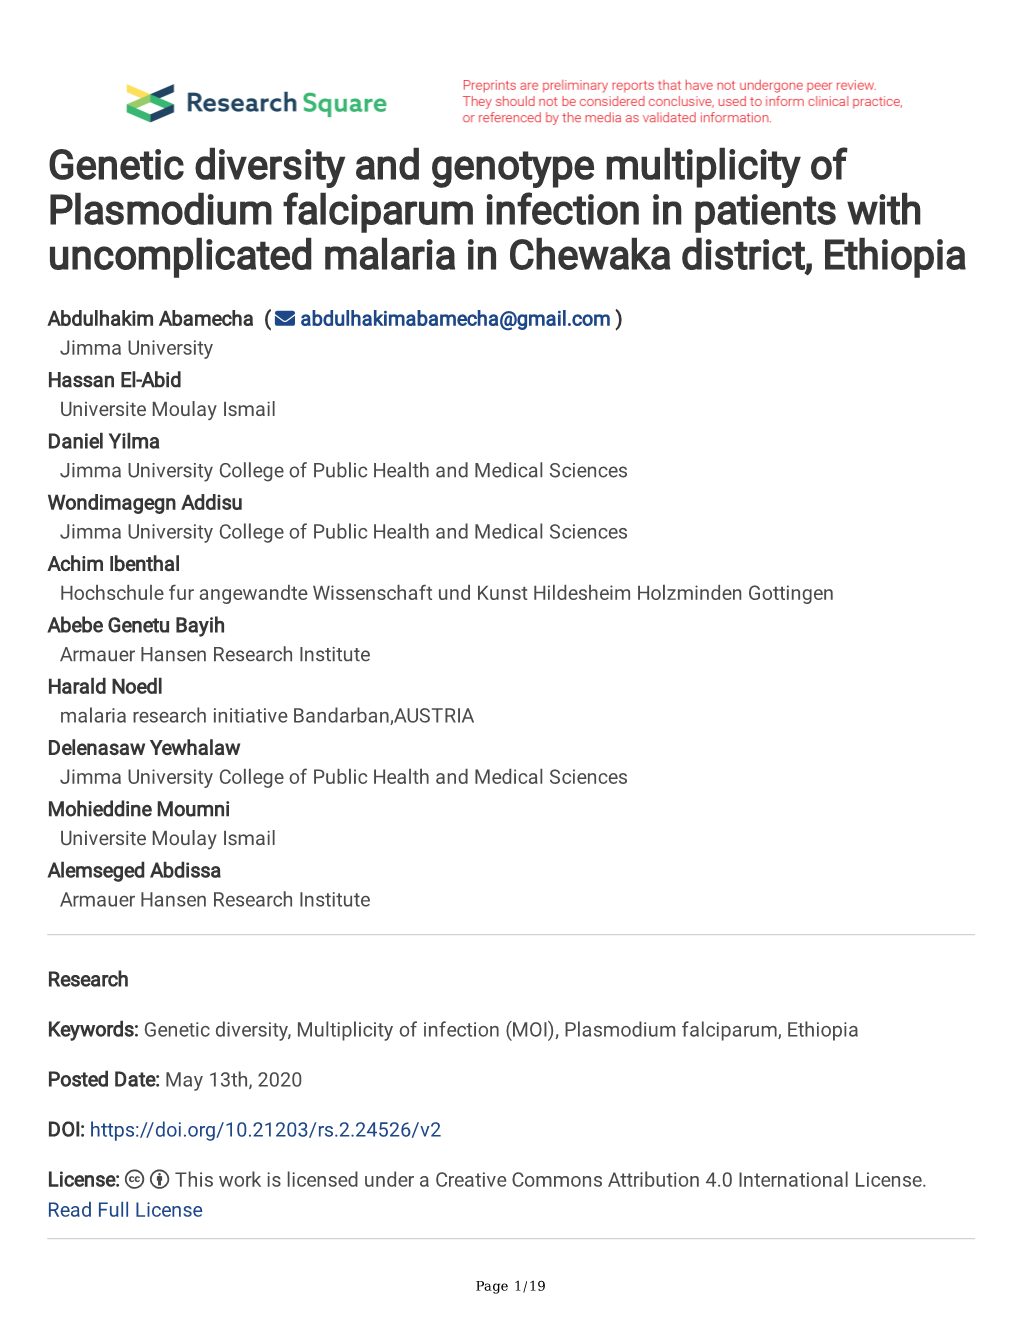 Genetic Diversity and Genotype Multiplicity of Plasmodium Falciparum Infection in Patients with Uncomplicated Malaria in Chewaka District, Ethiopia